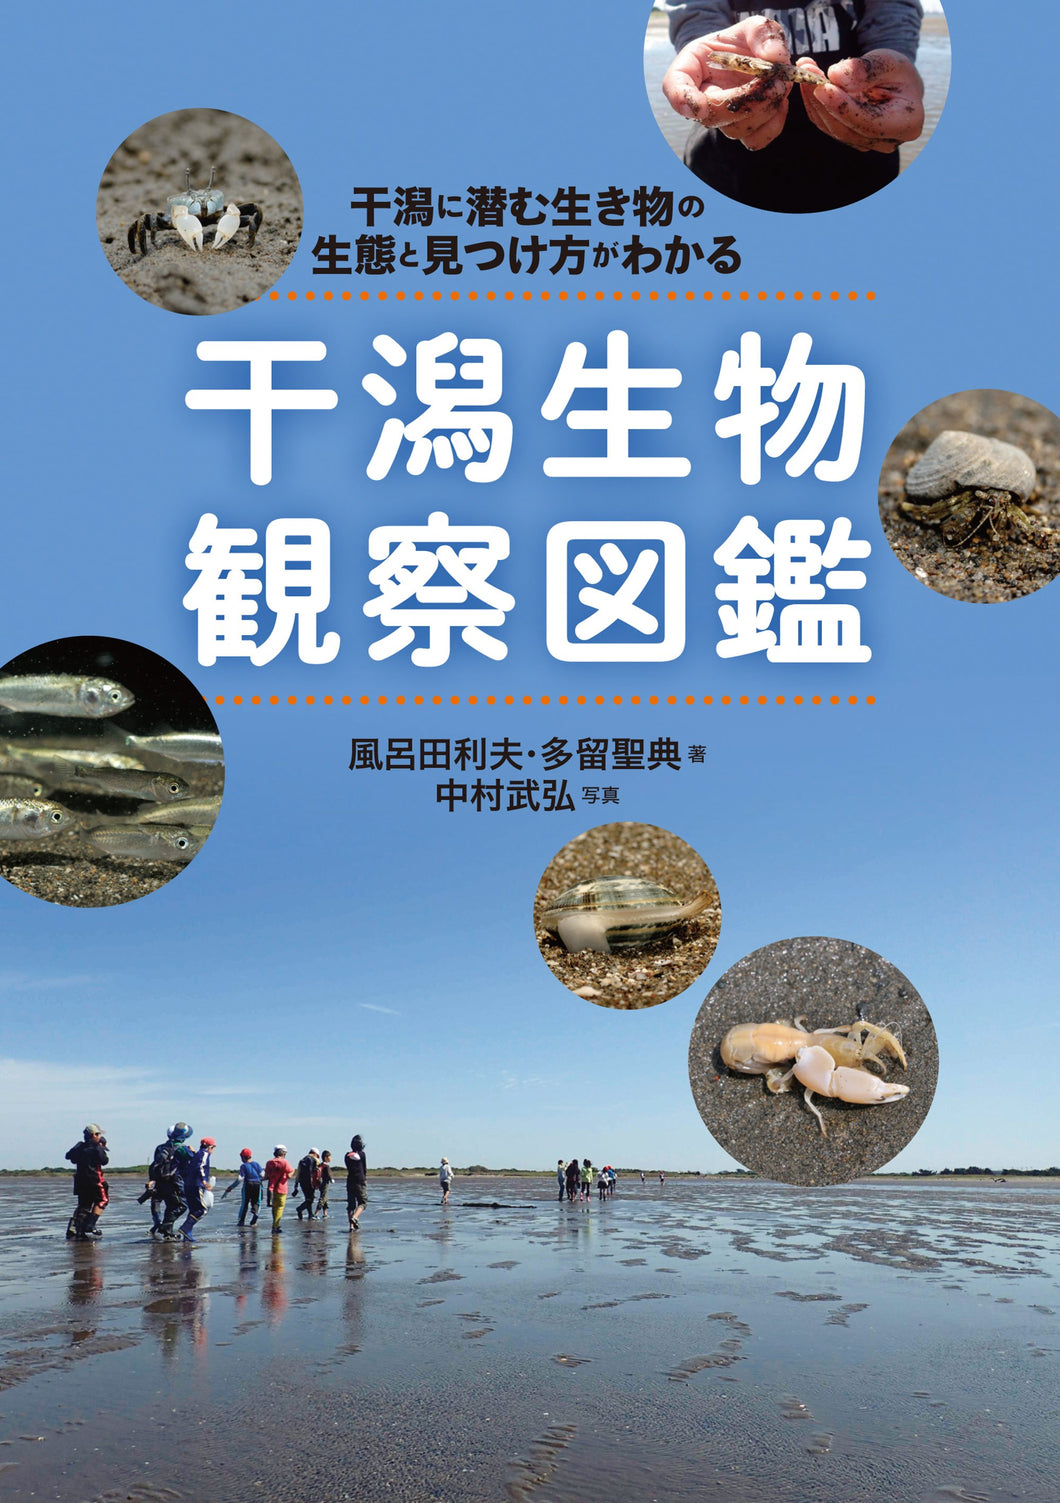 Illustrated Guide to Observing Tidal Flats